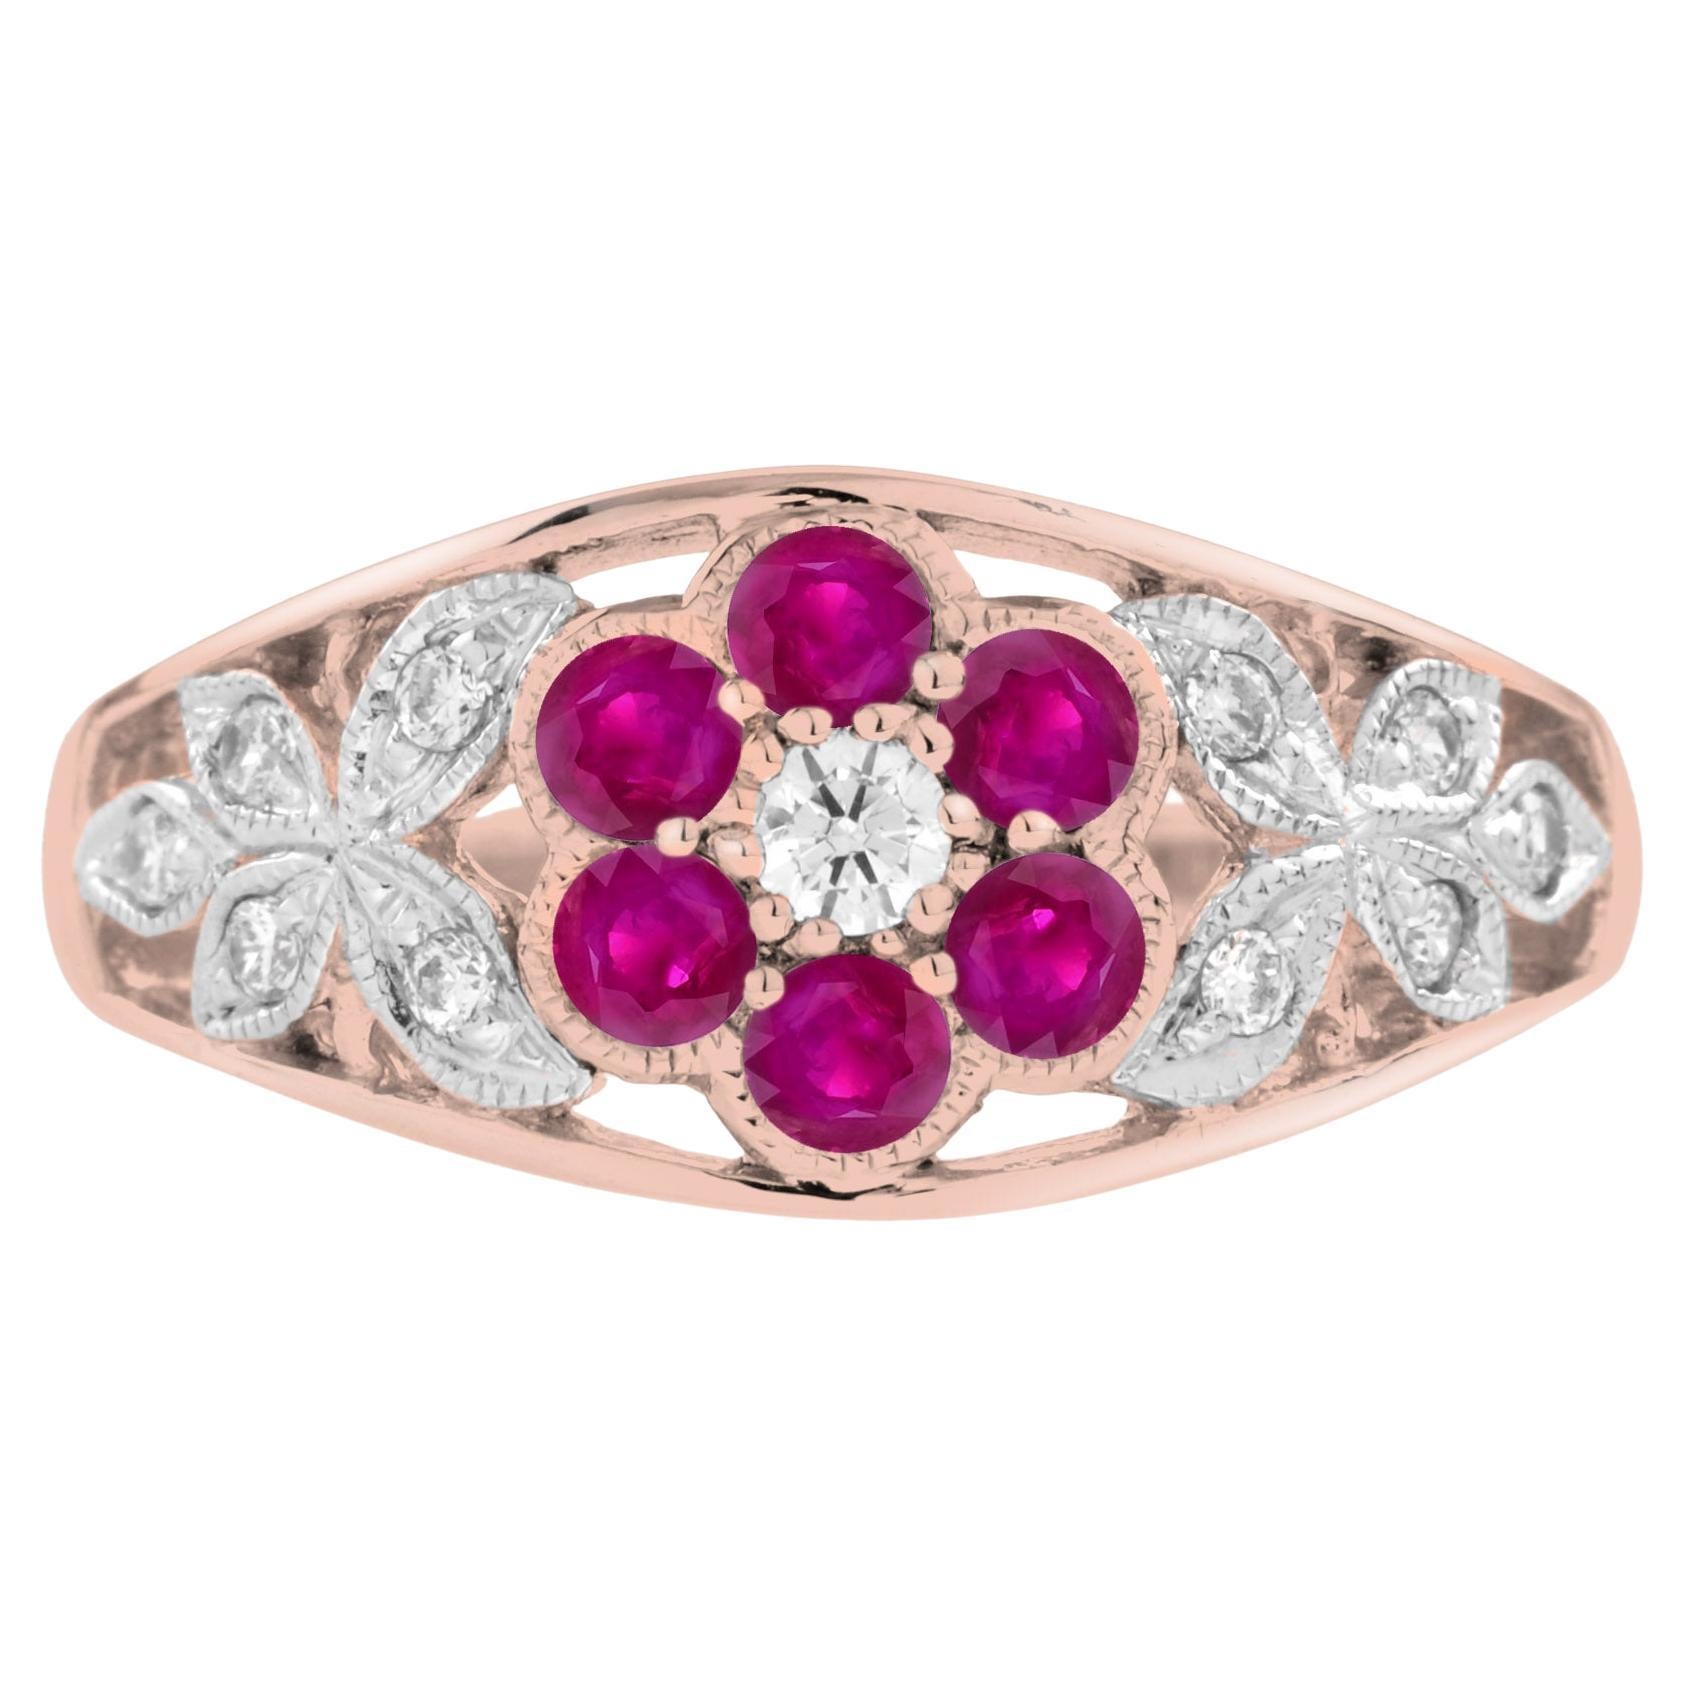 Diamond and Ruby Floral Cluster Engagement Ring in 14K Rose Gold